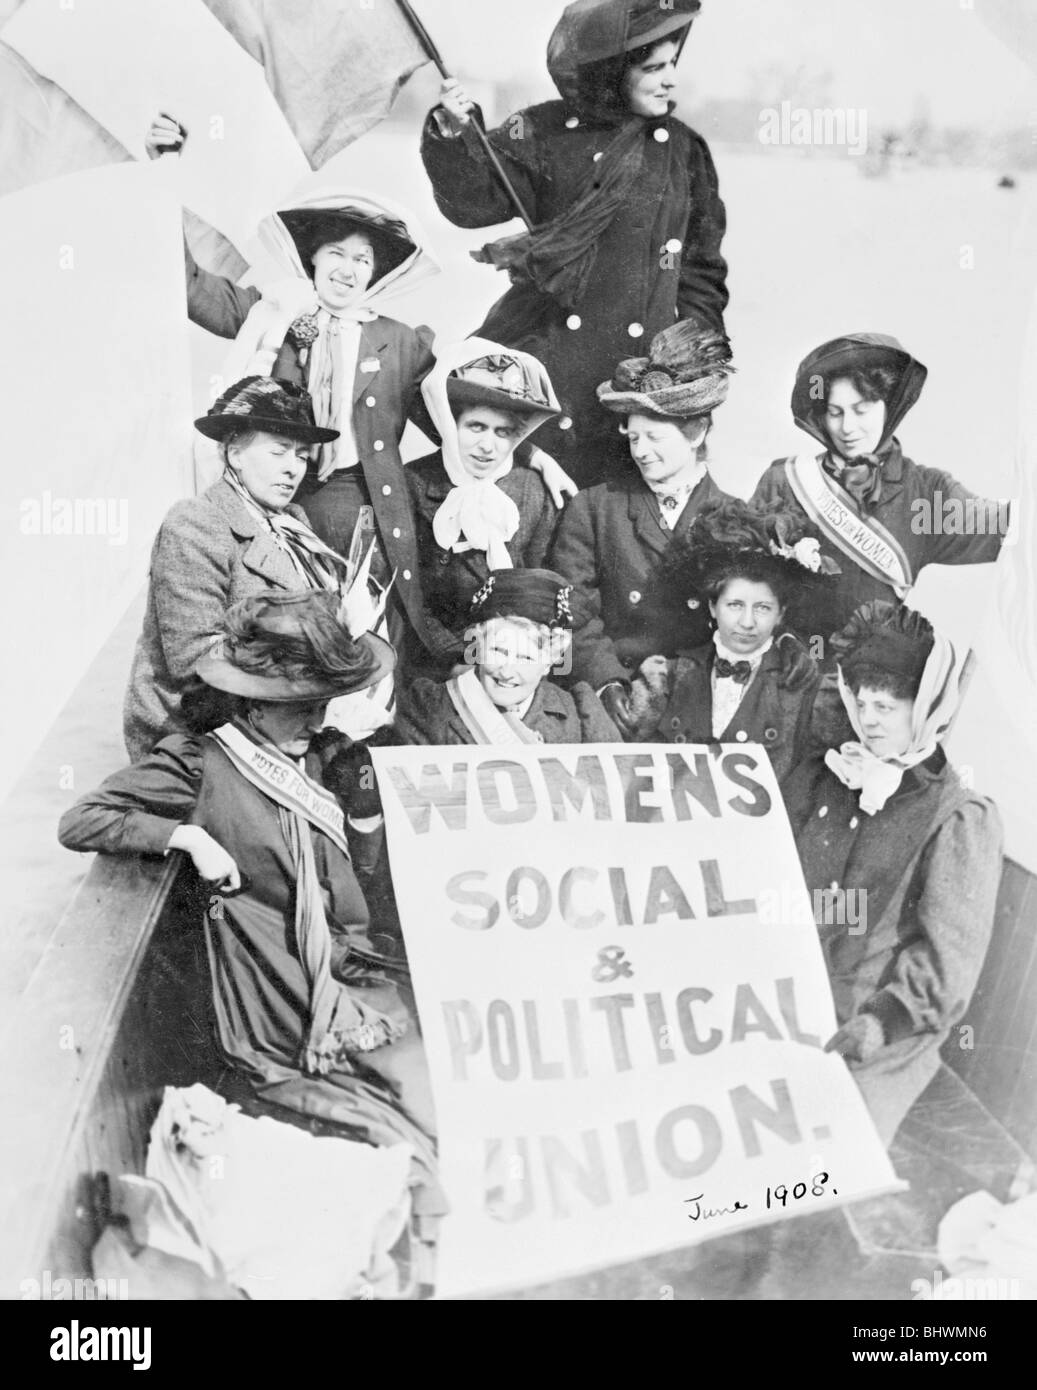 Suffragettes advertising the Women's Social and Political Union, from a boat, June 1908. Artist: Unknown Stock Photo